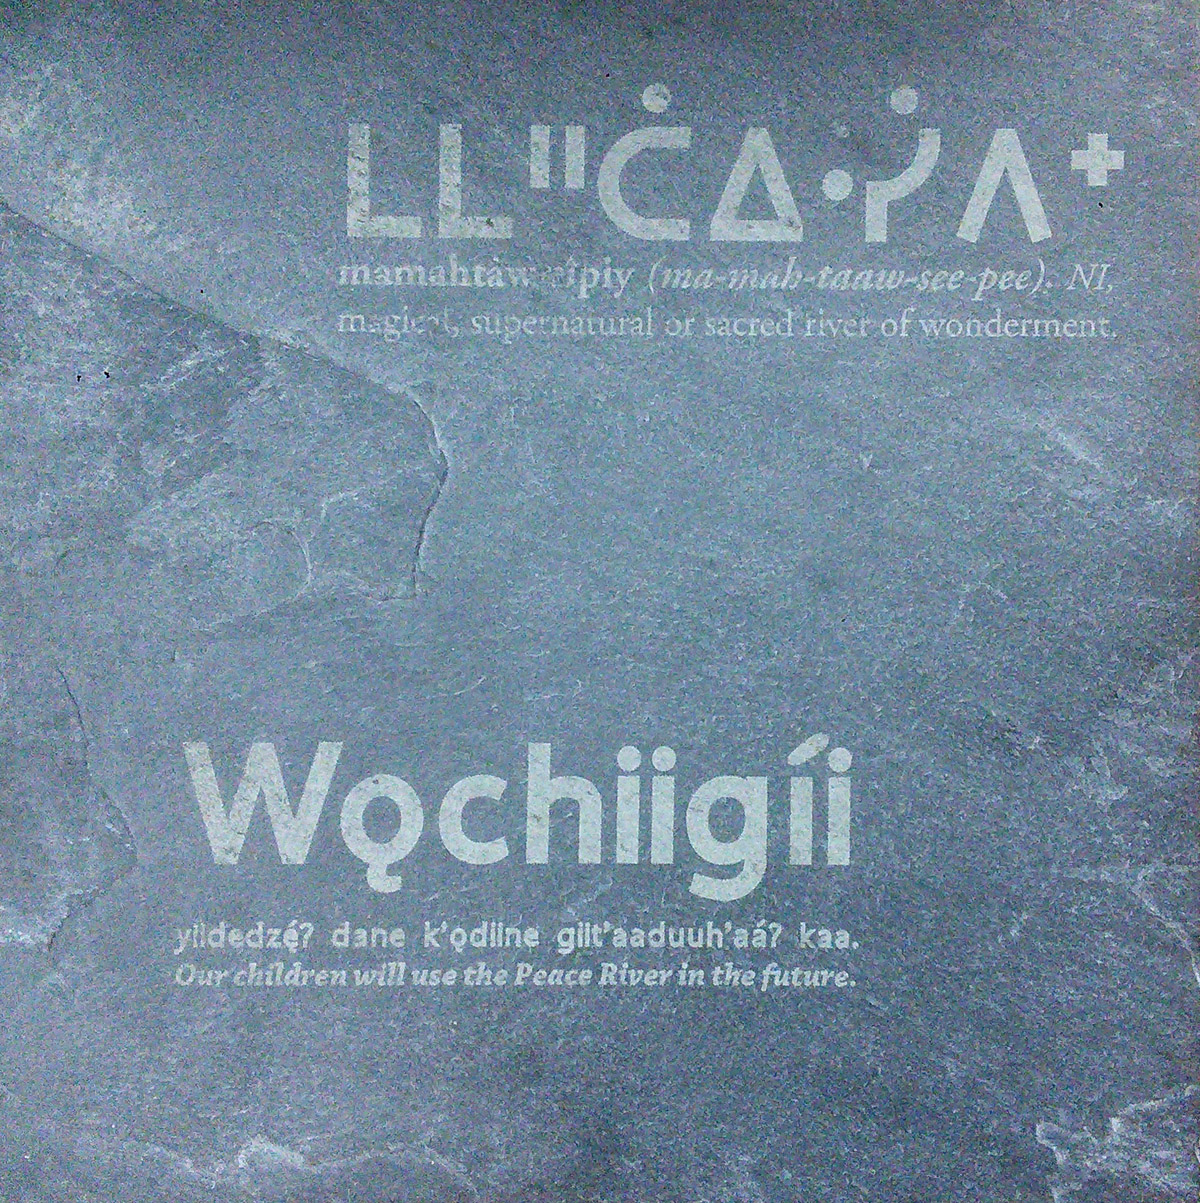 slate1etched